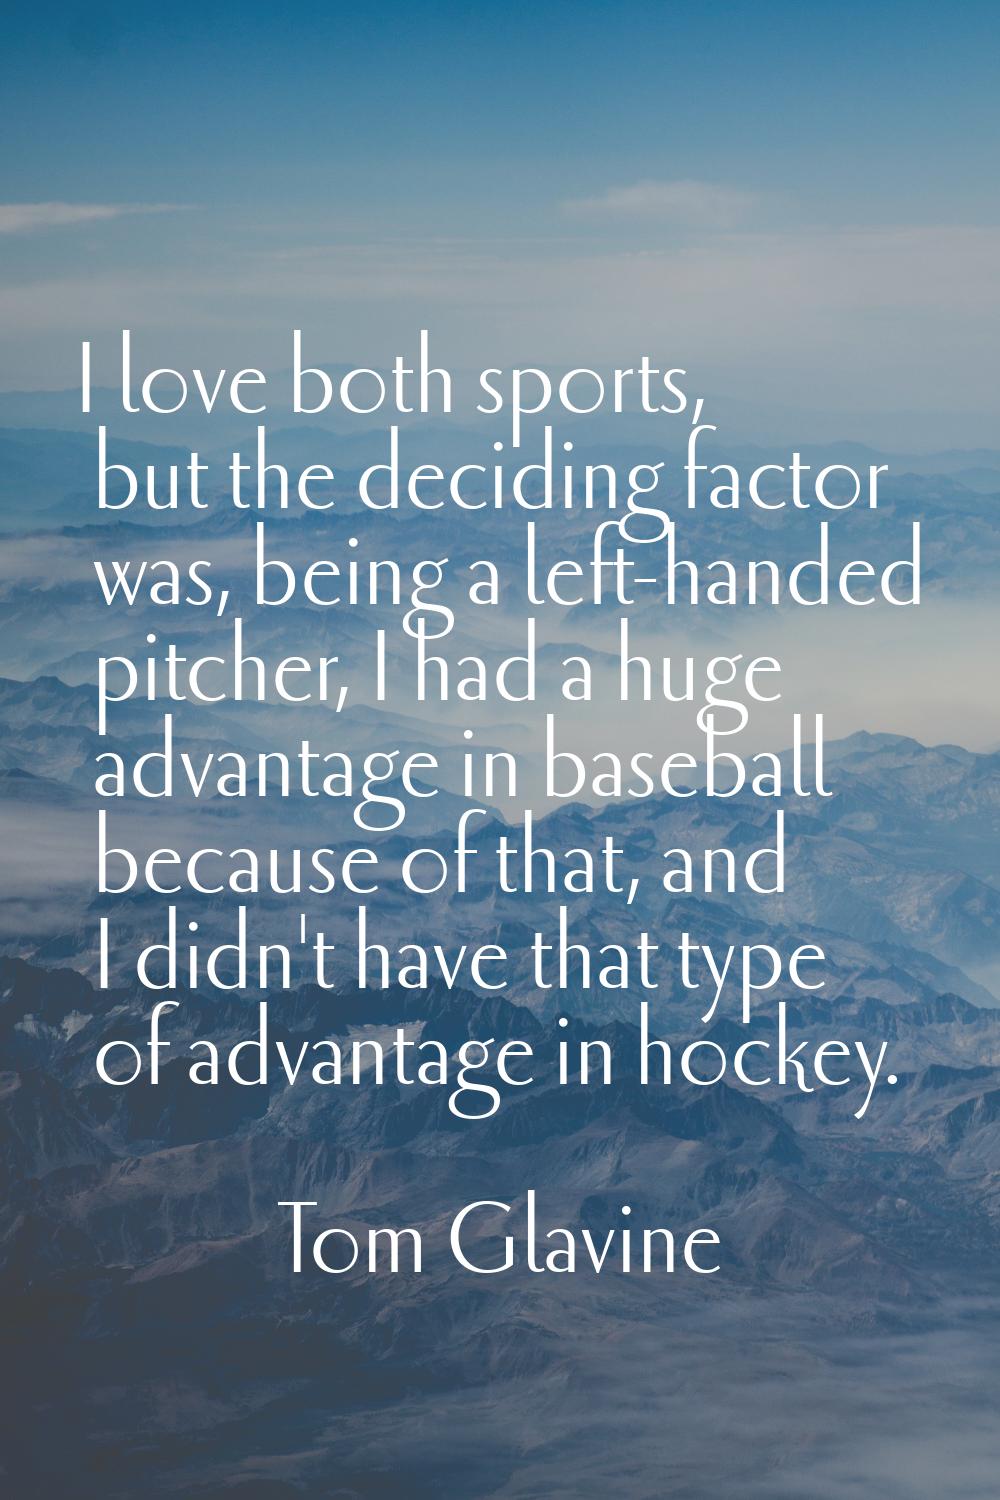 I love both sports, but the deciding factor was, being a left-handed pitcher, I had a huge advantag